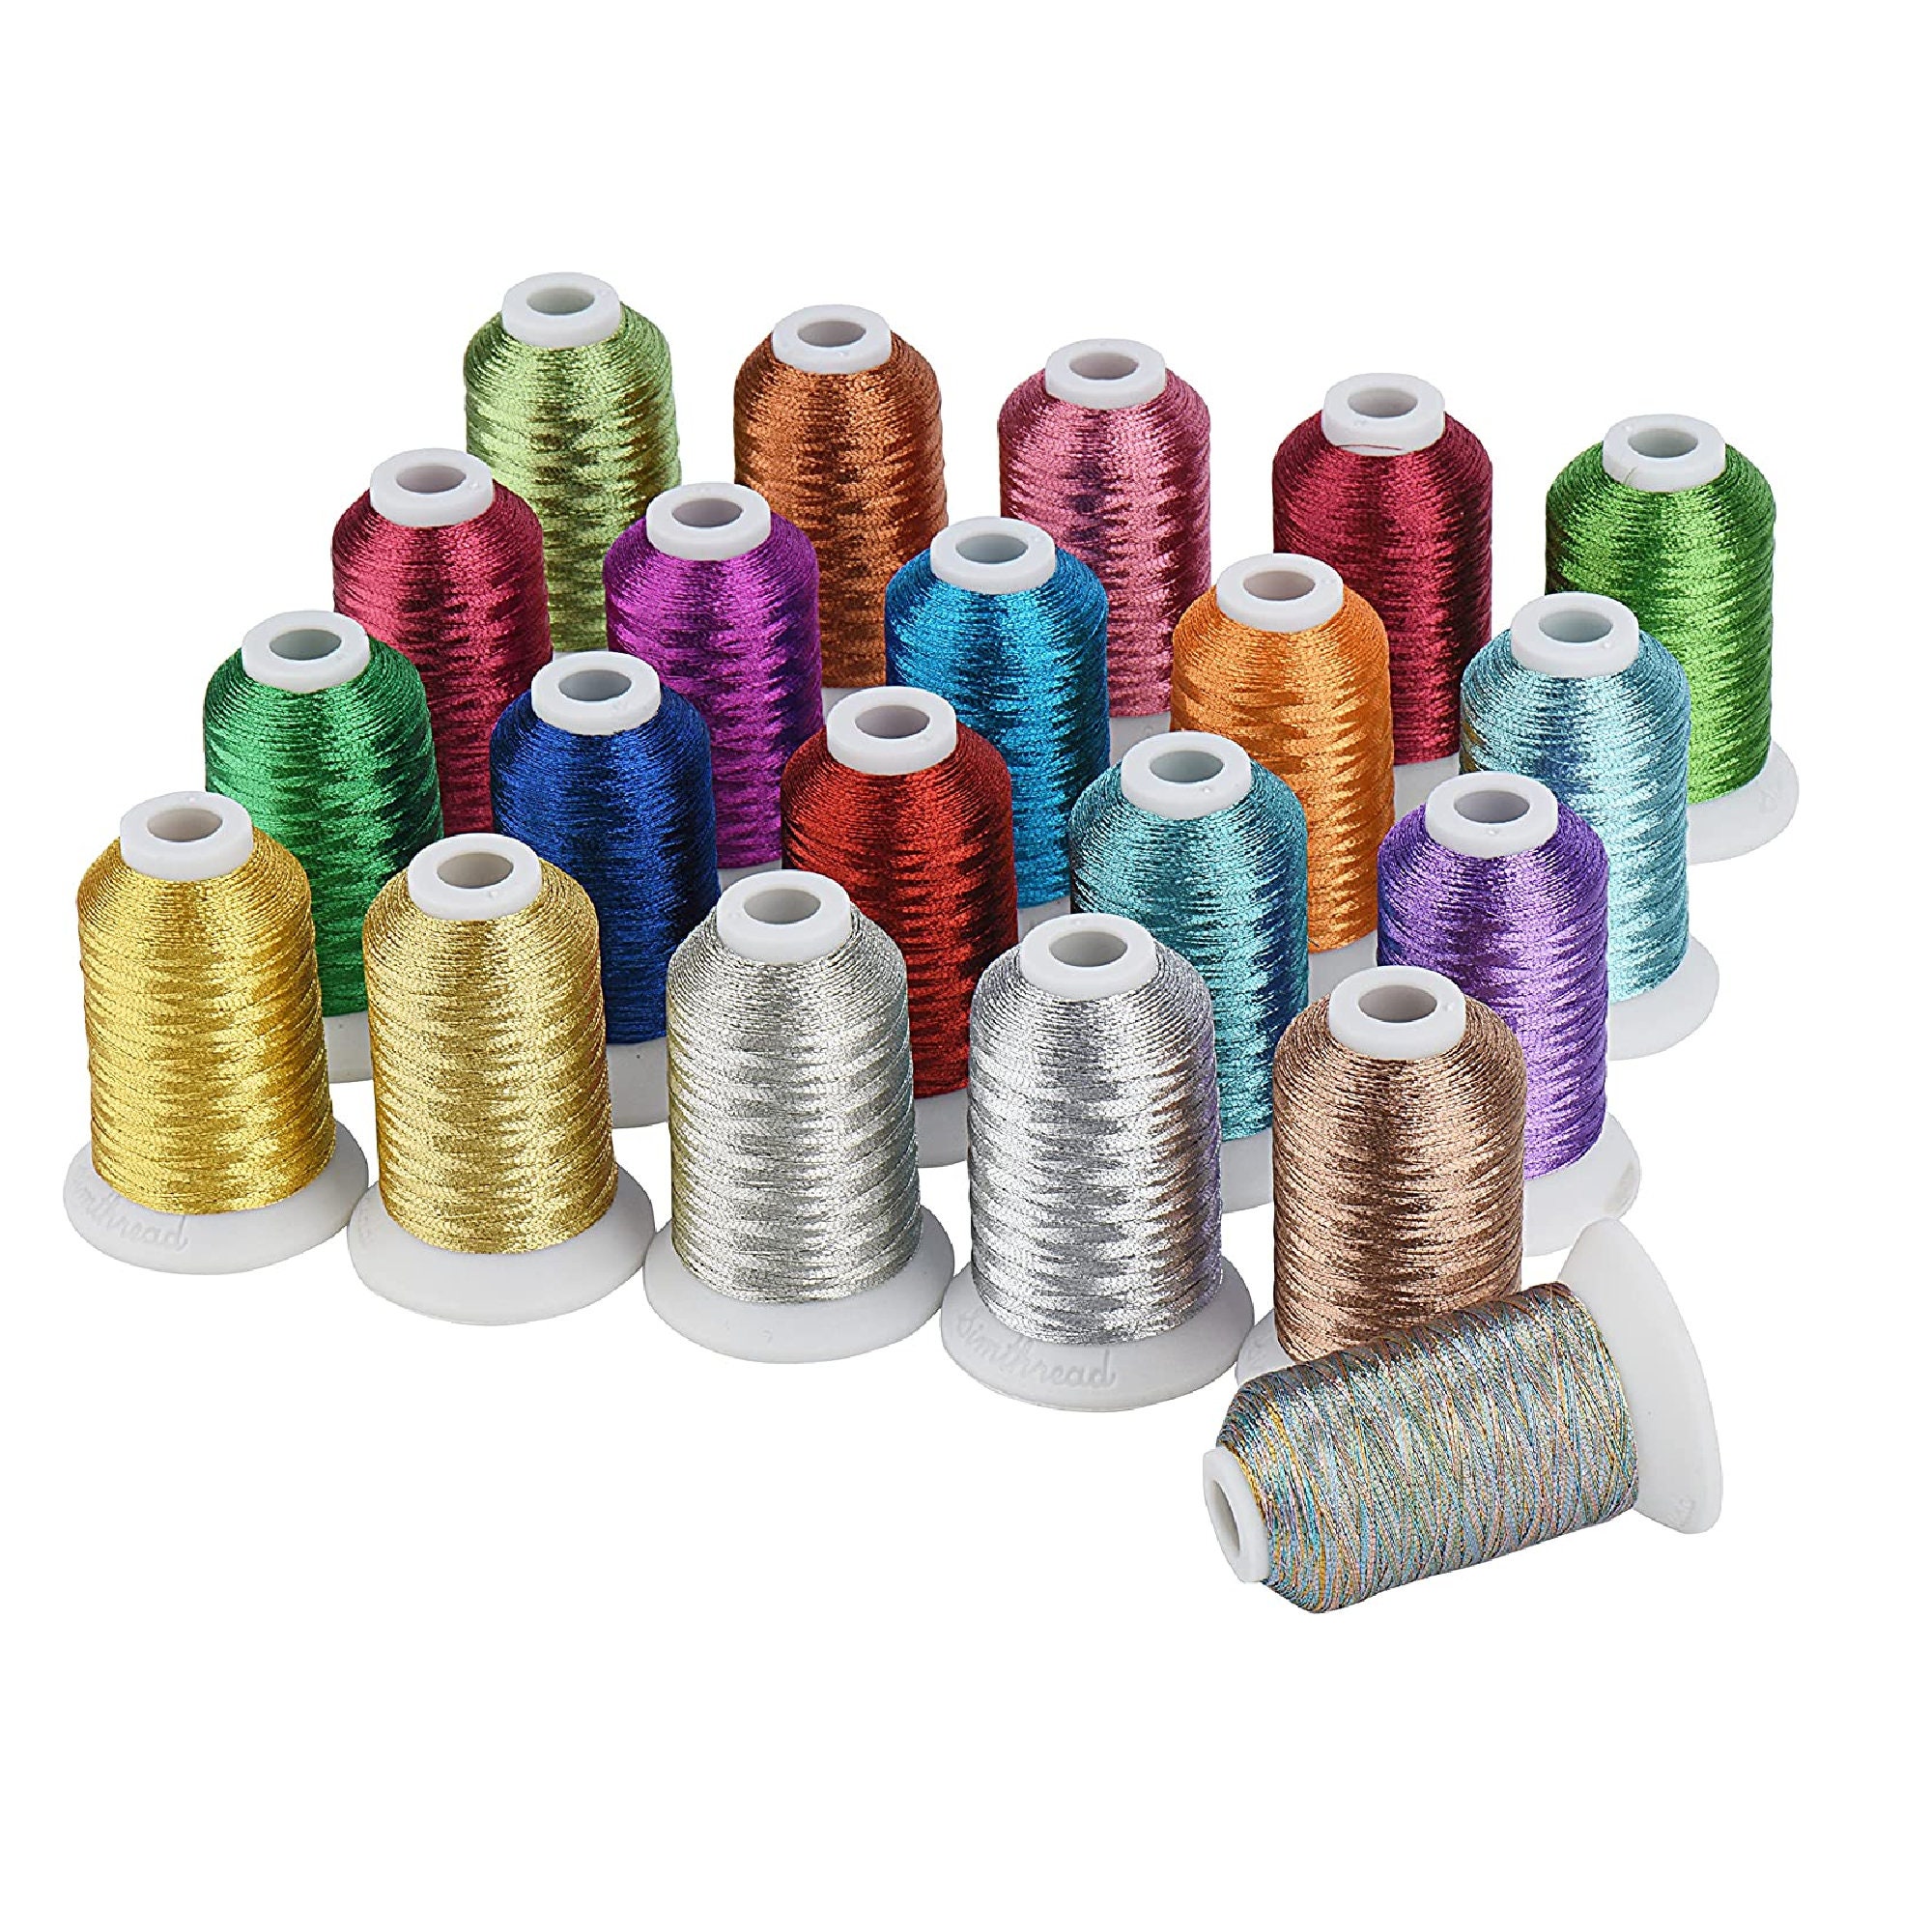 Each Spool 550Y Simthread New 30 Color Packs Polyester Embroidery Machine Thread Kit 500M Essential Color 3 